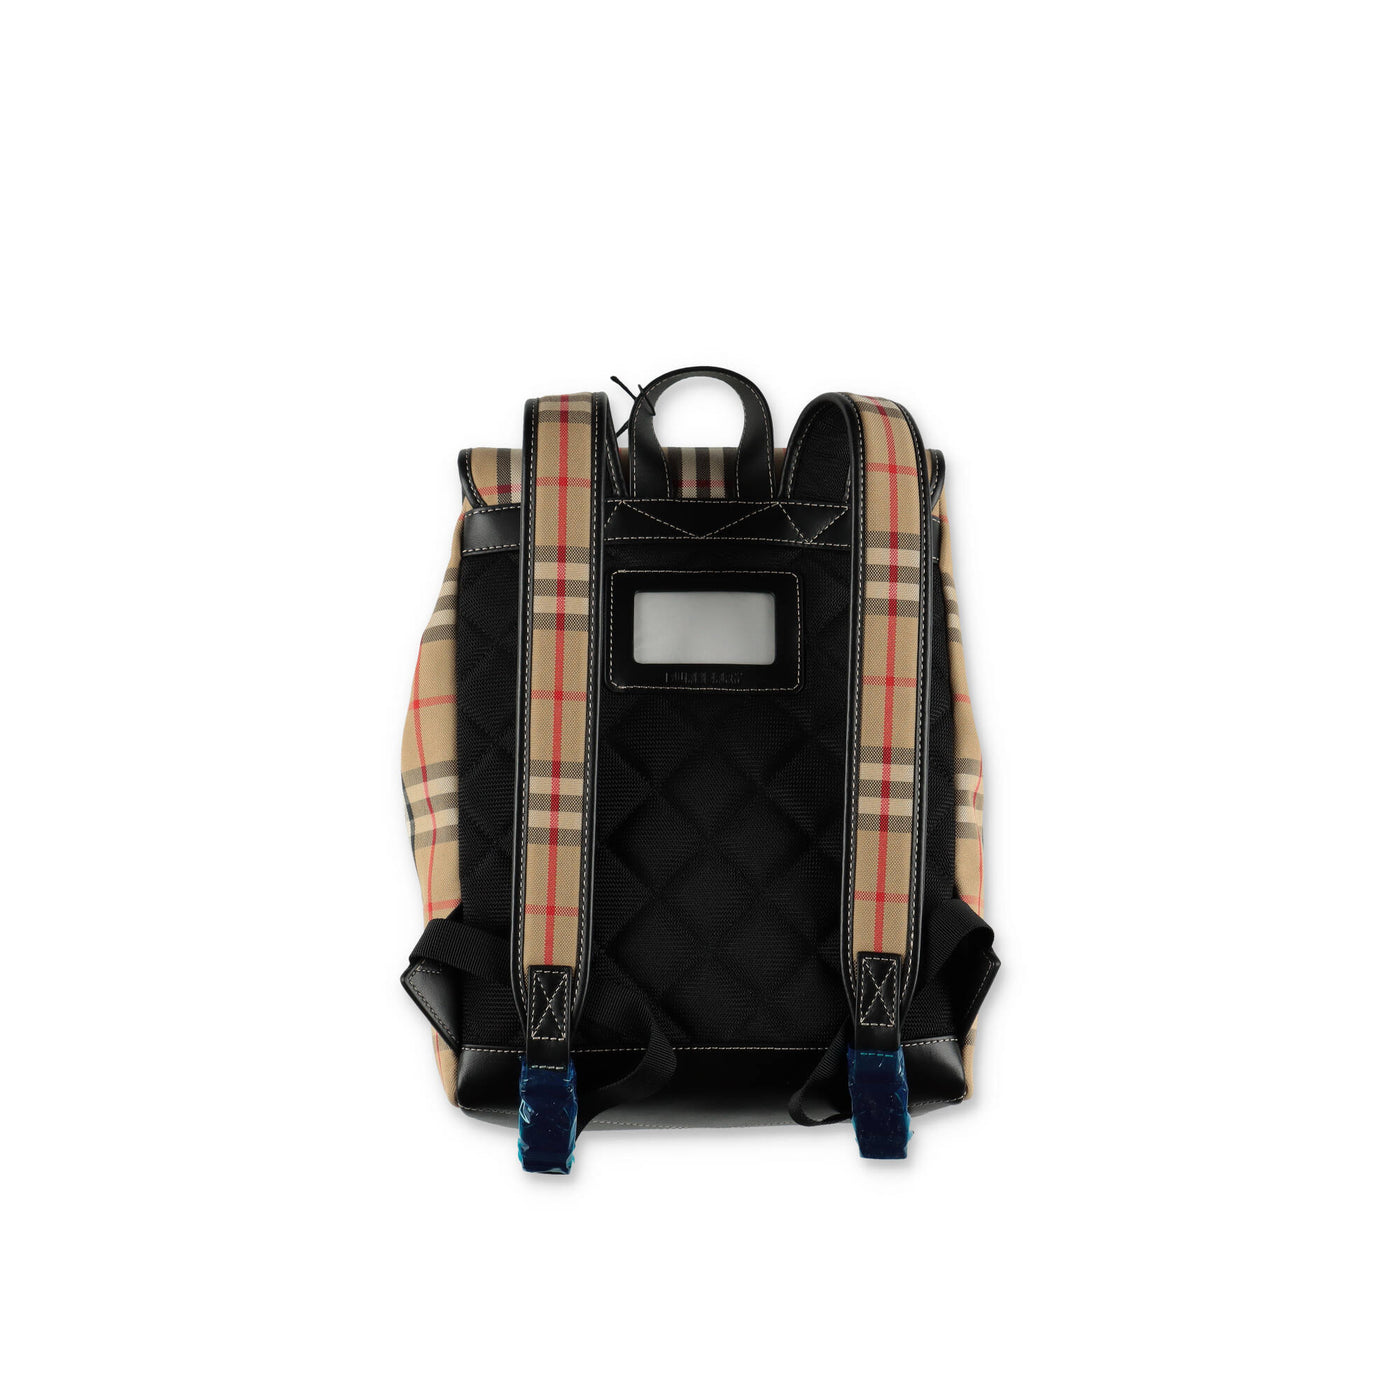 Vintage check cotton boy BURBERRY backpack